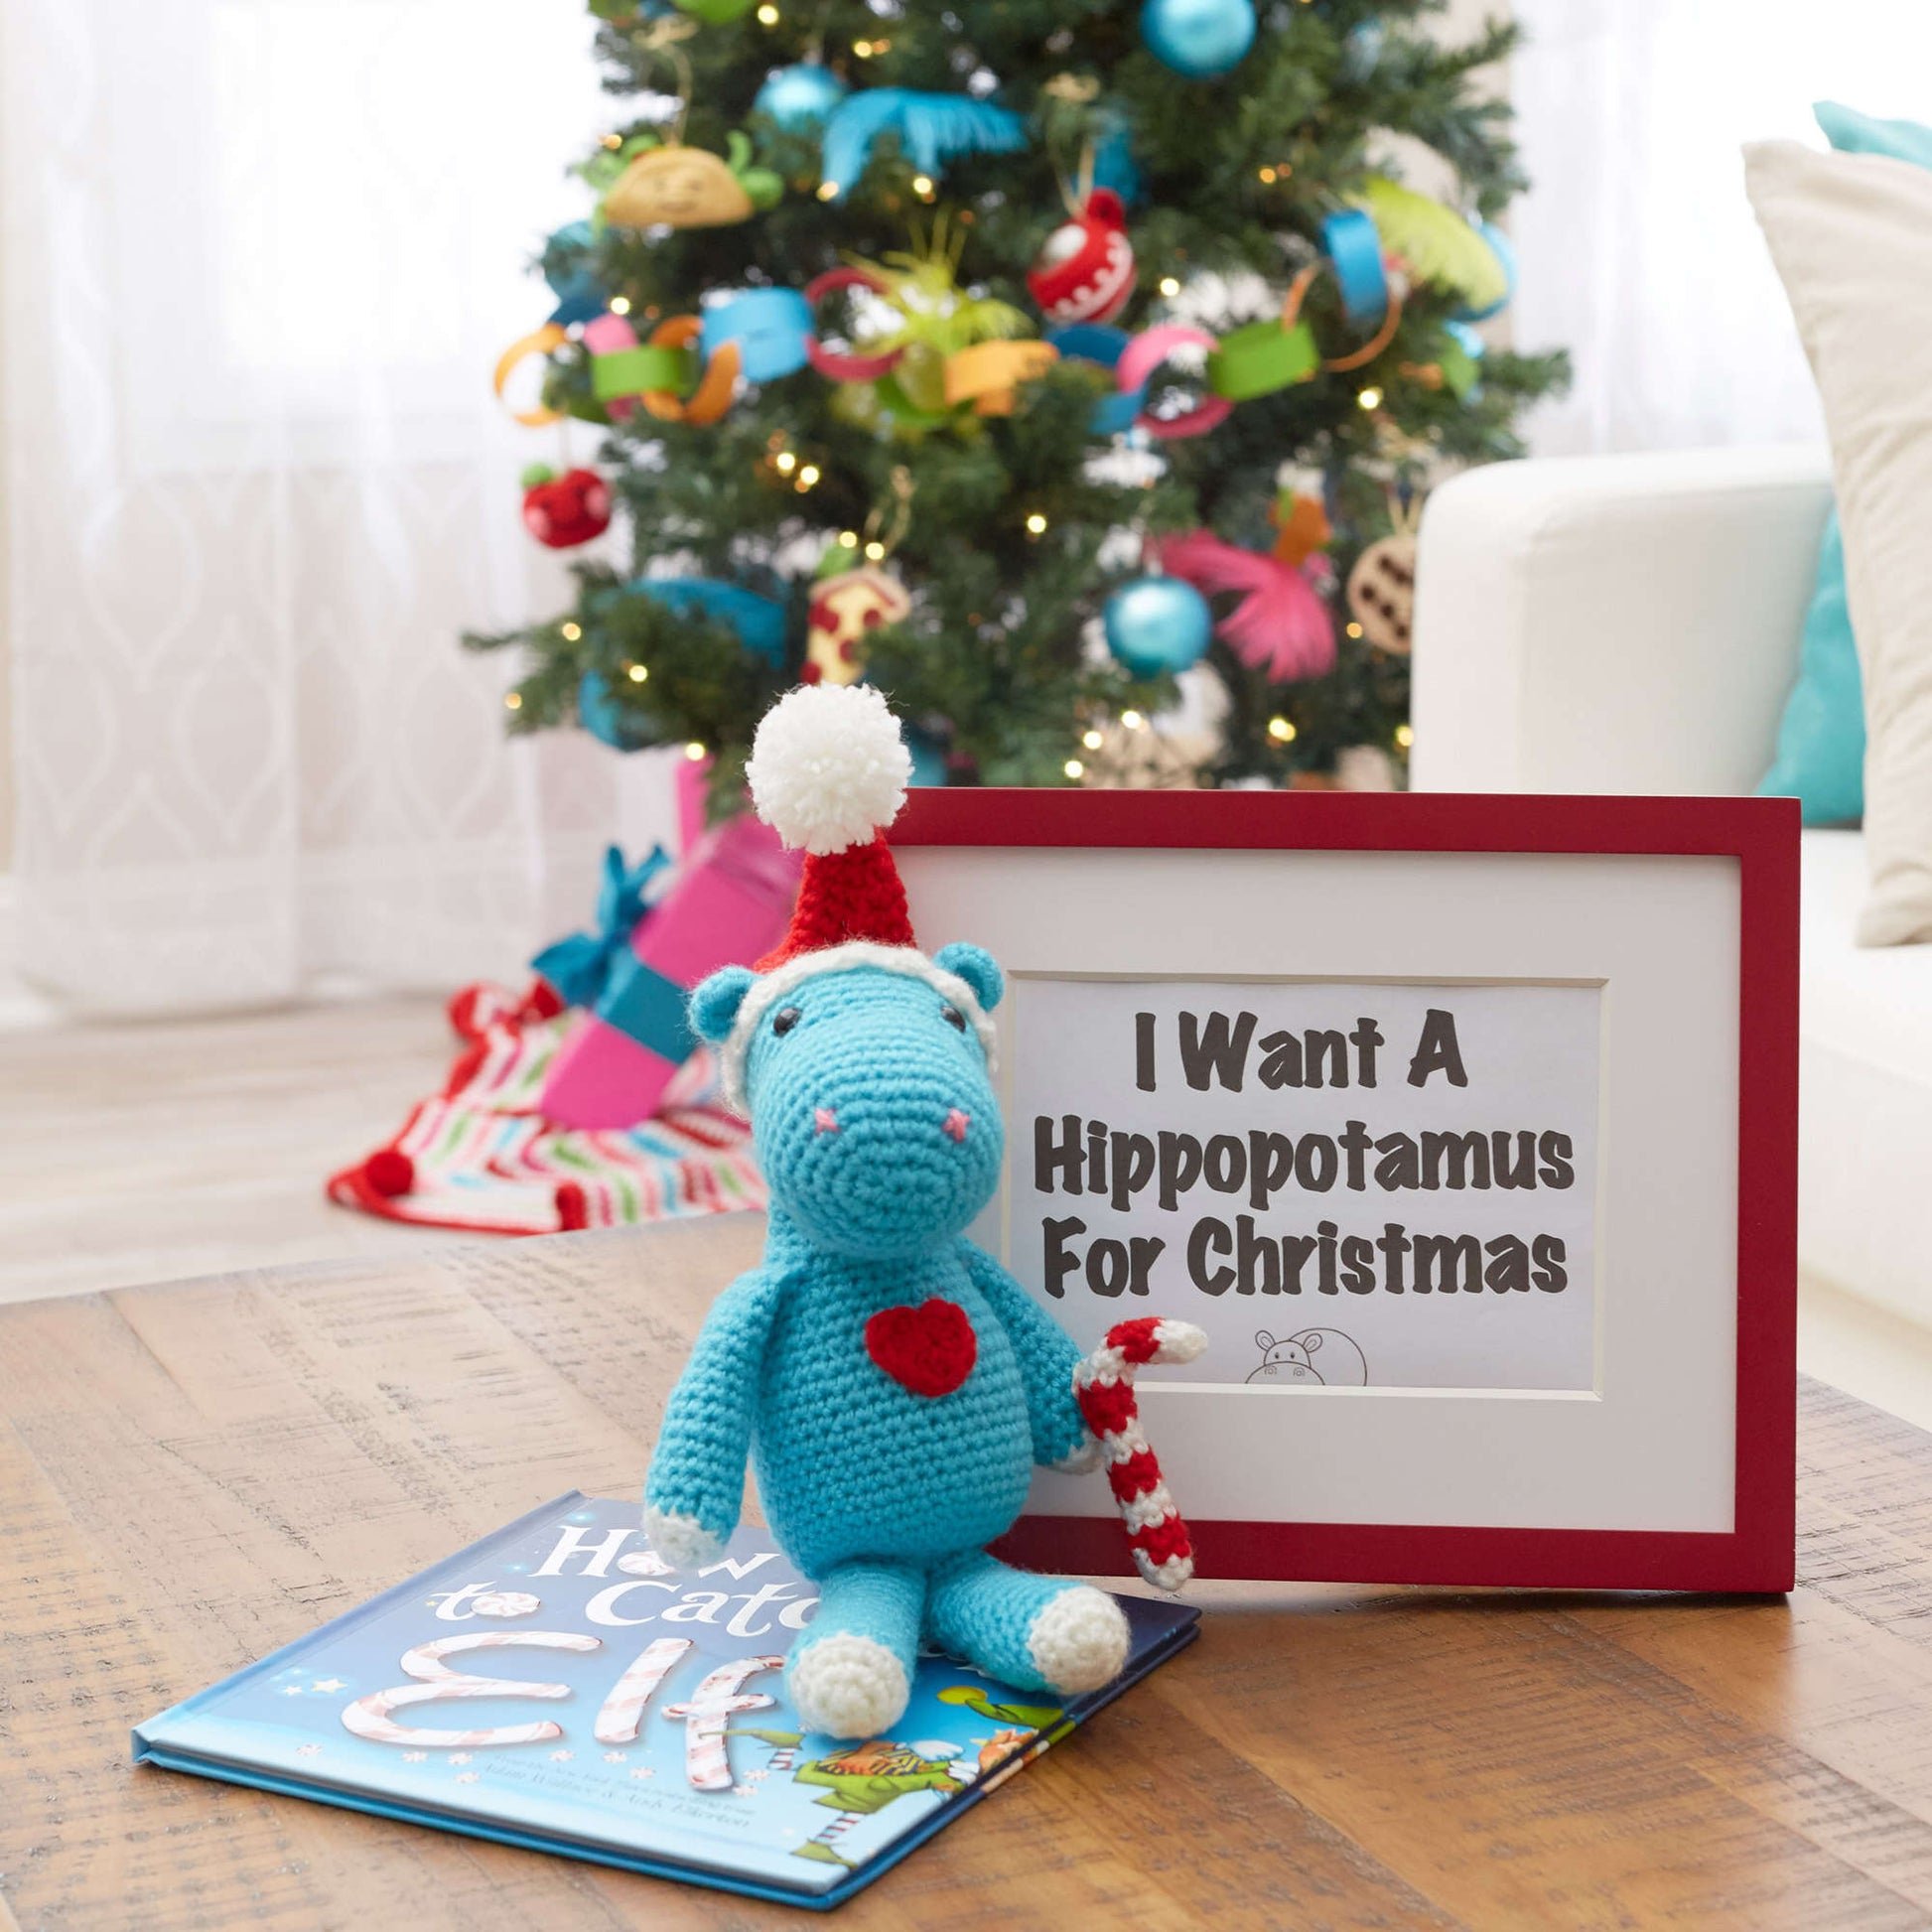 Free Red Heart Crochet I Want A Hippopotamus For Christmas Pattern